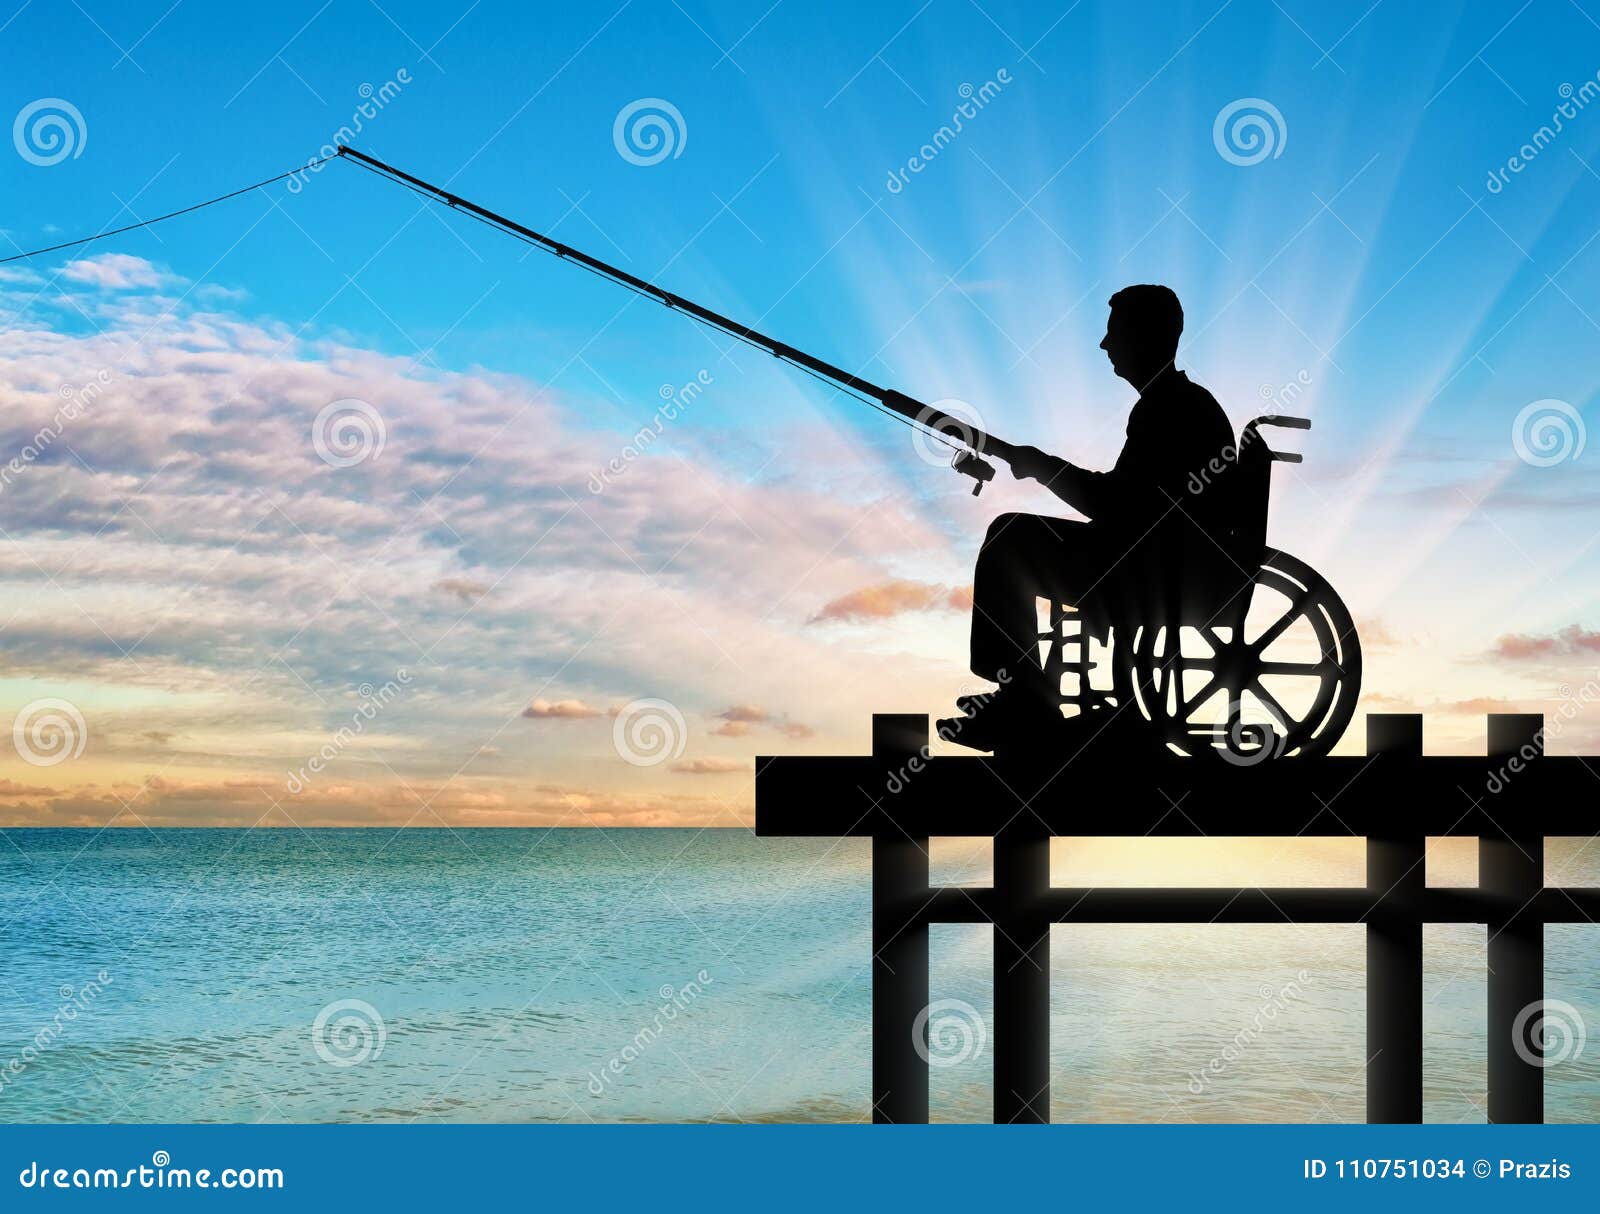 Silhouette of a Disabled Man in a Wheelchair with a Fishing Rod in